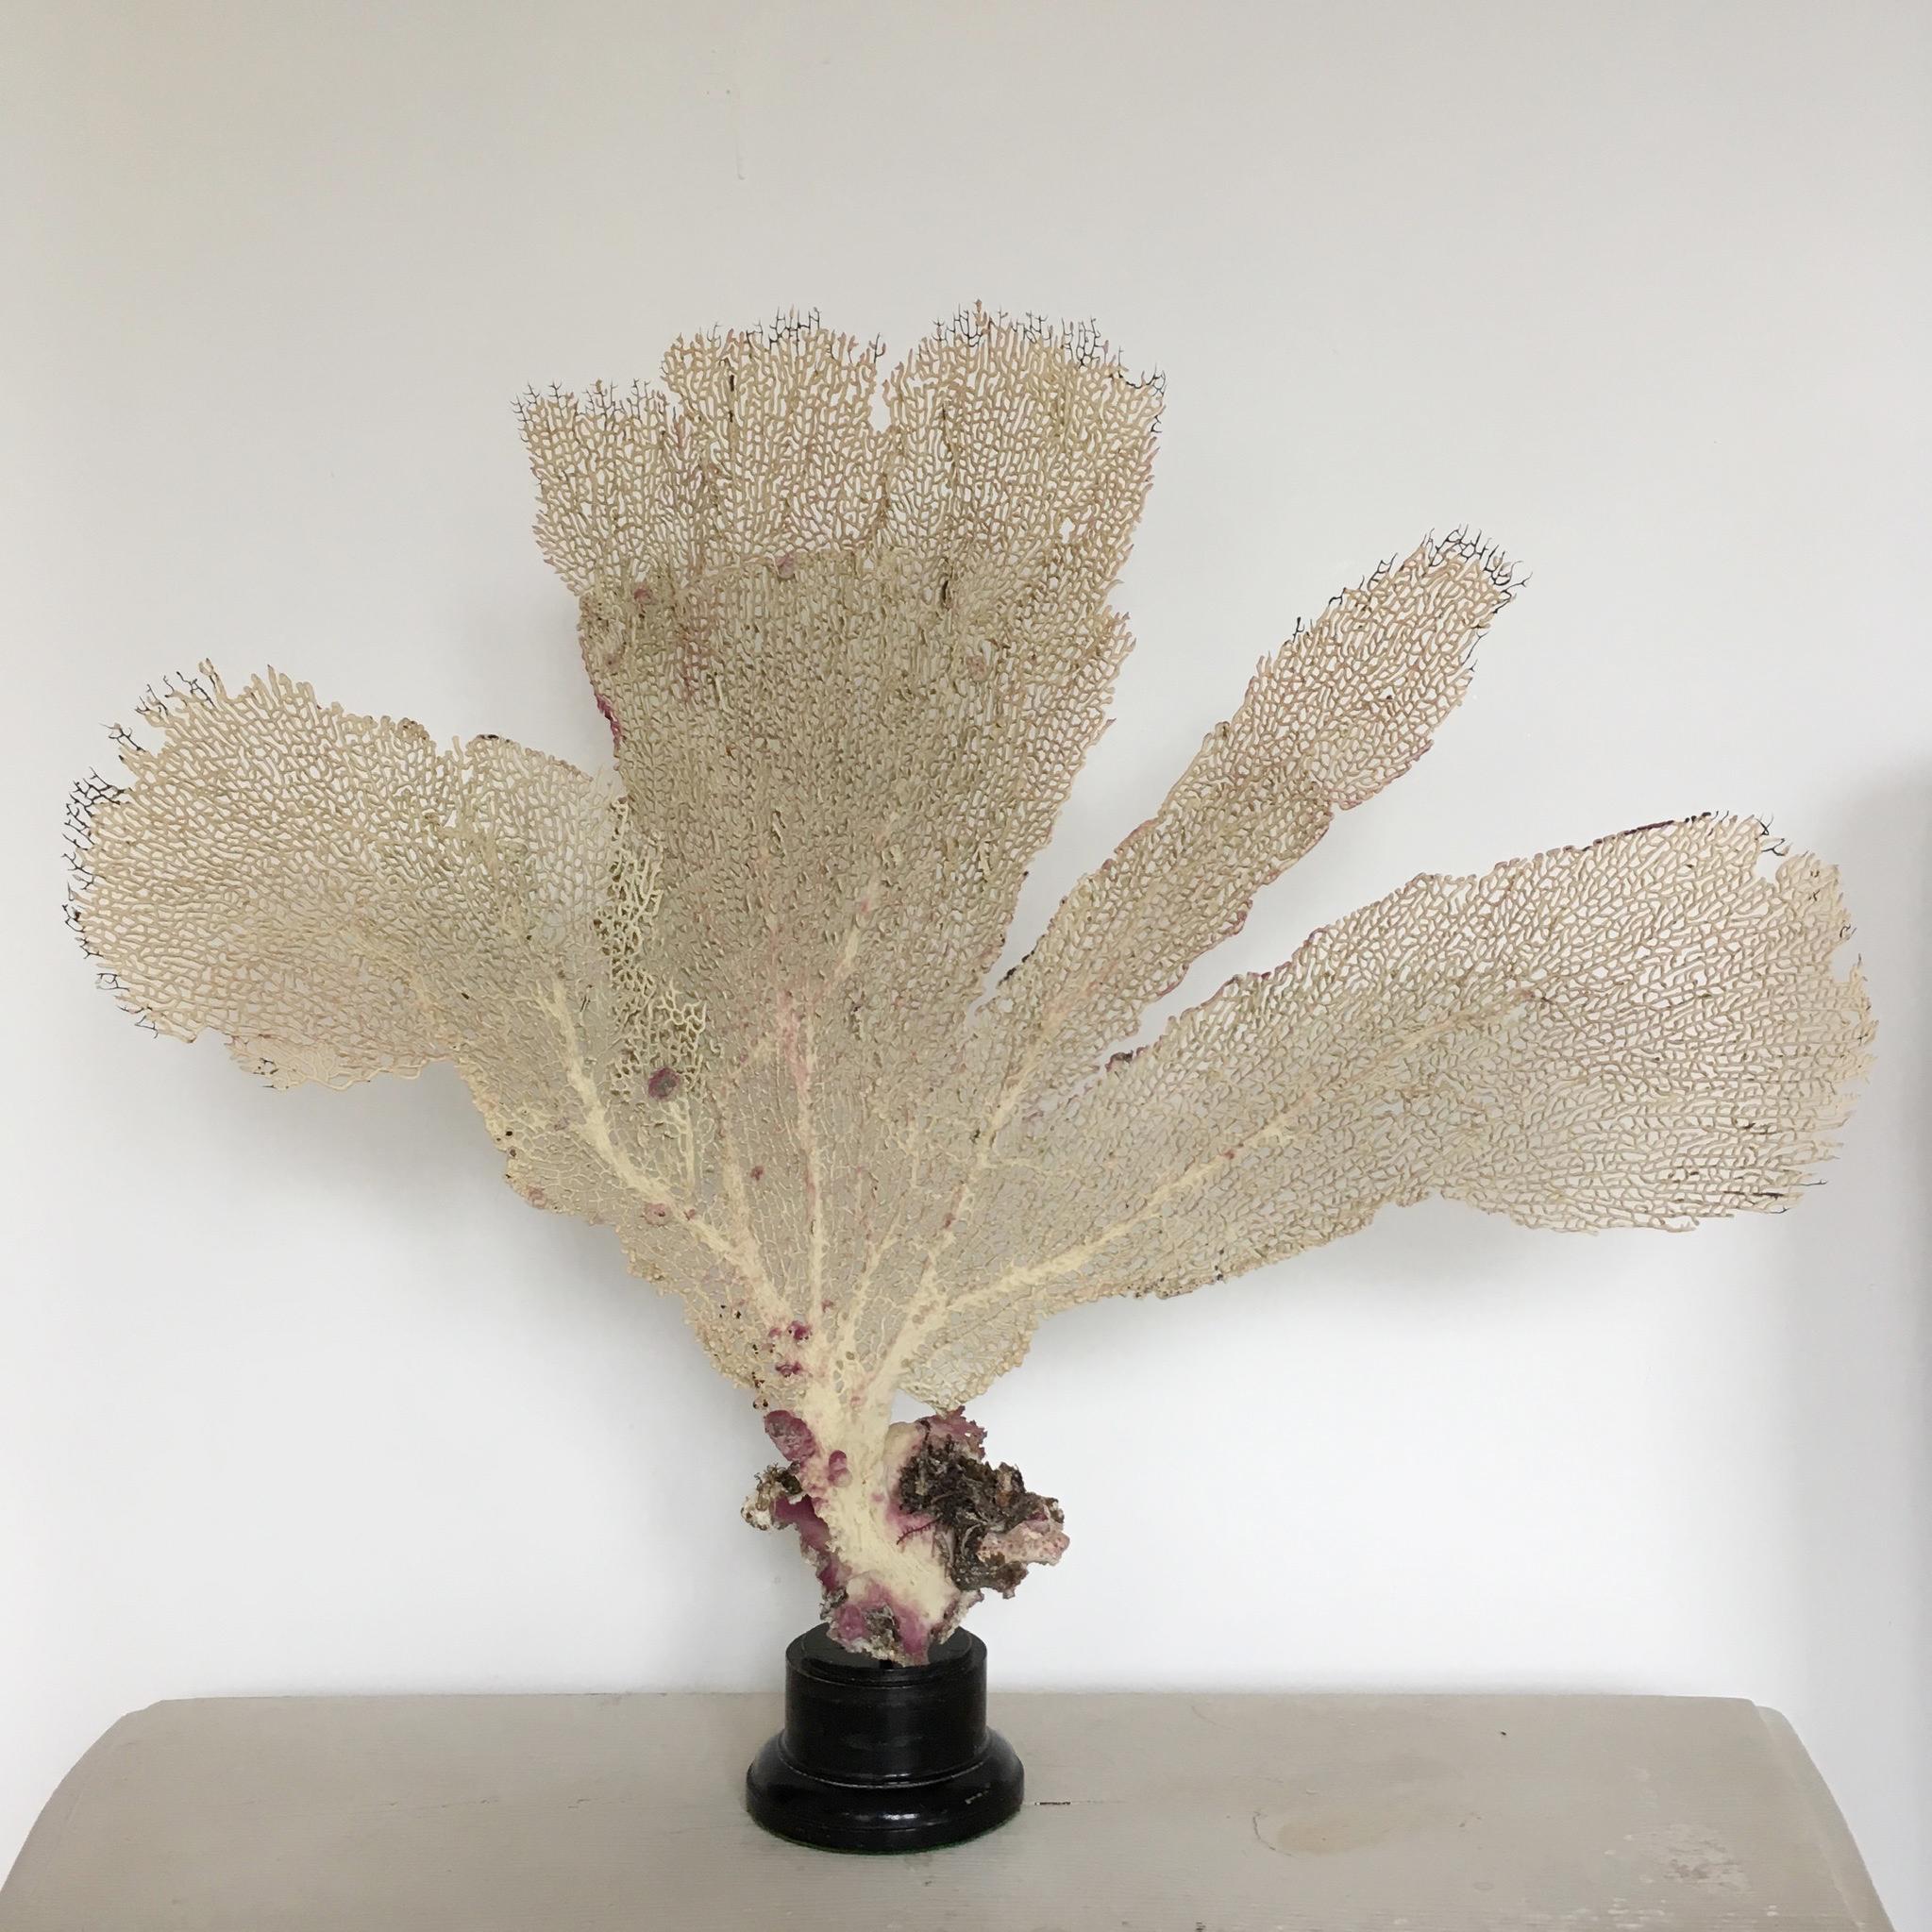 Beautiful natural vintage sea fan coral
Soft cream color with pinky / purple tones
The coral is mounted on an antique ebonized wooden base

Measures: 51cm height
58cm width
9cm base.

